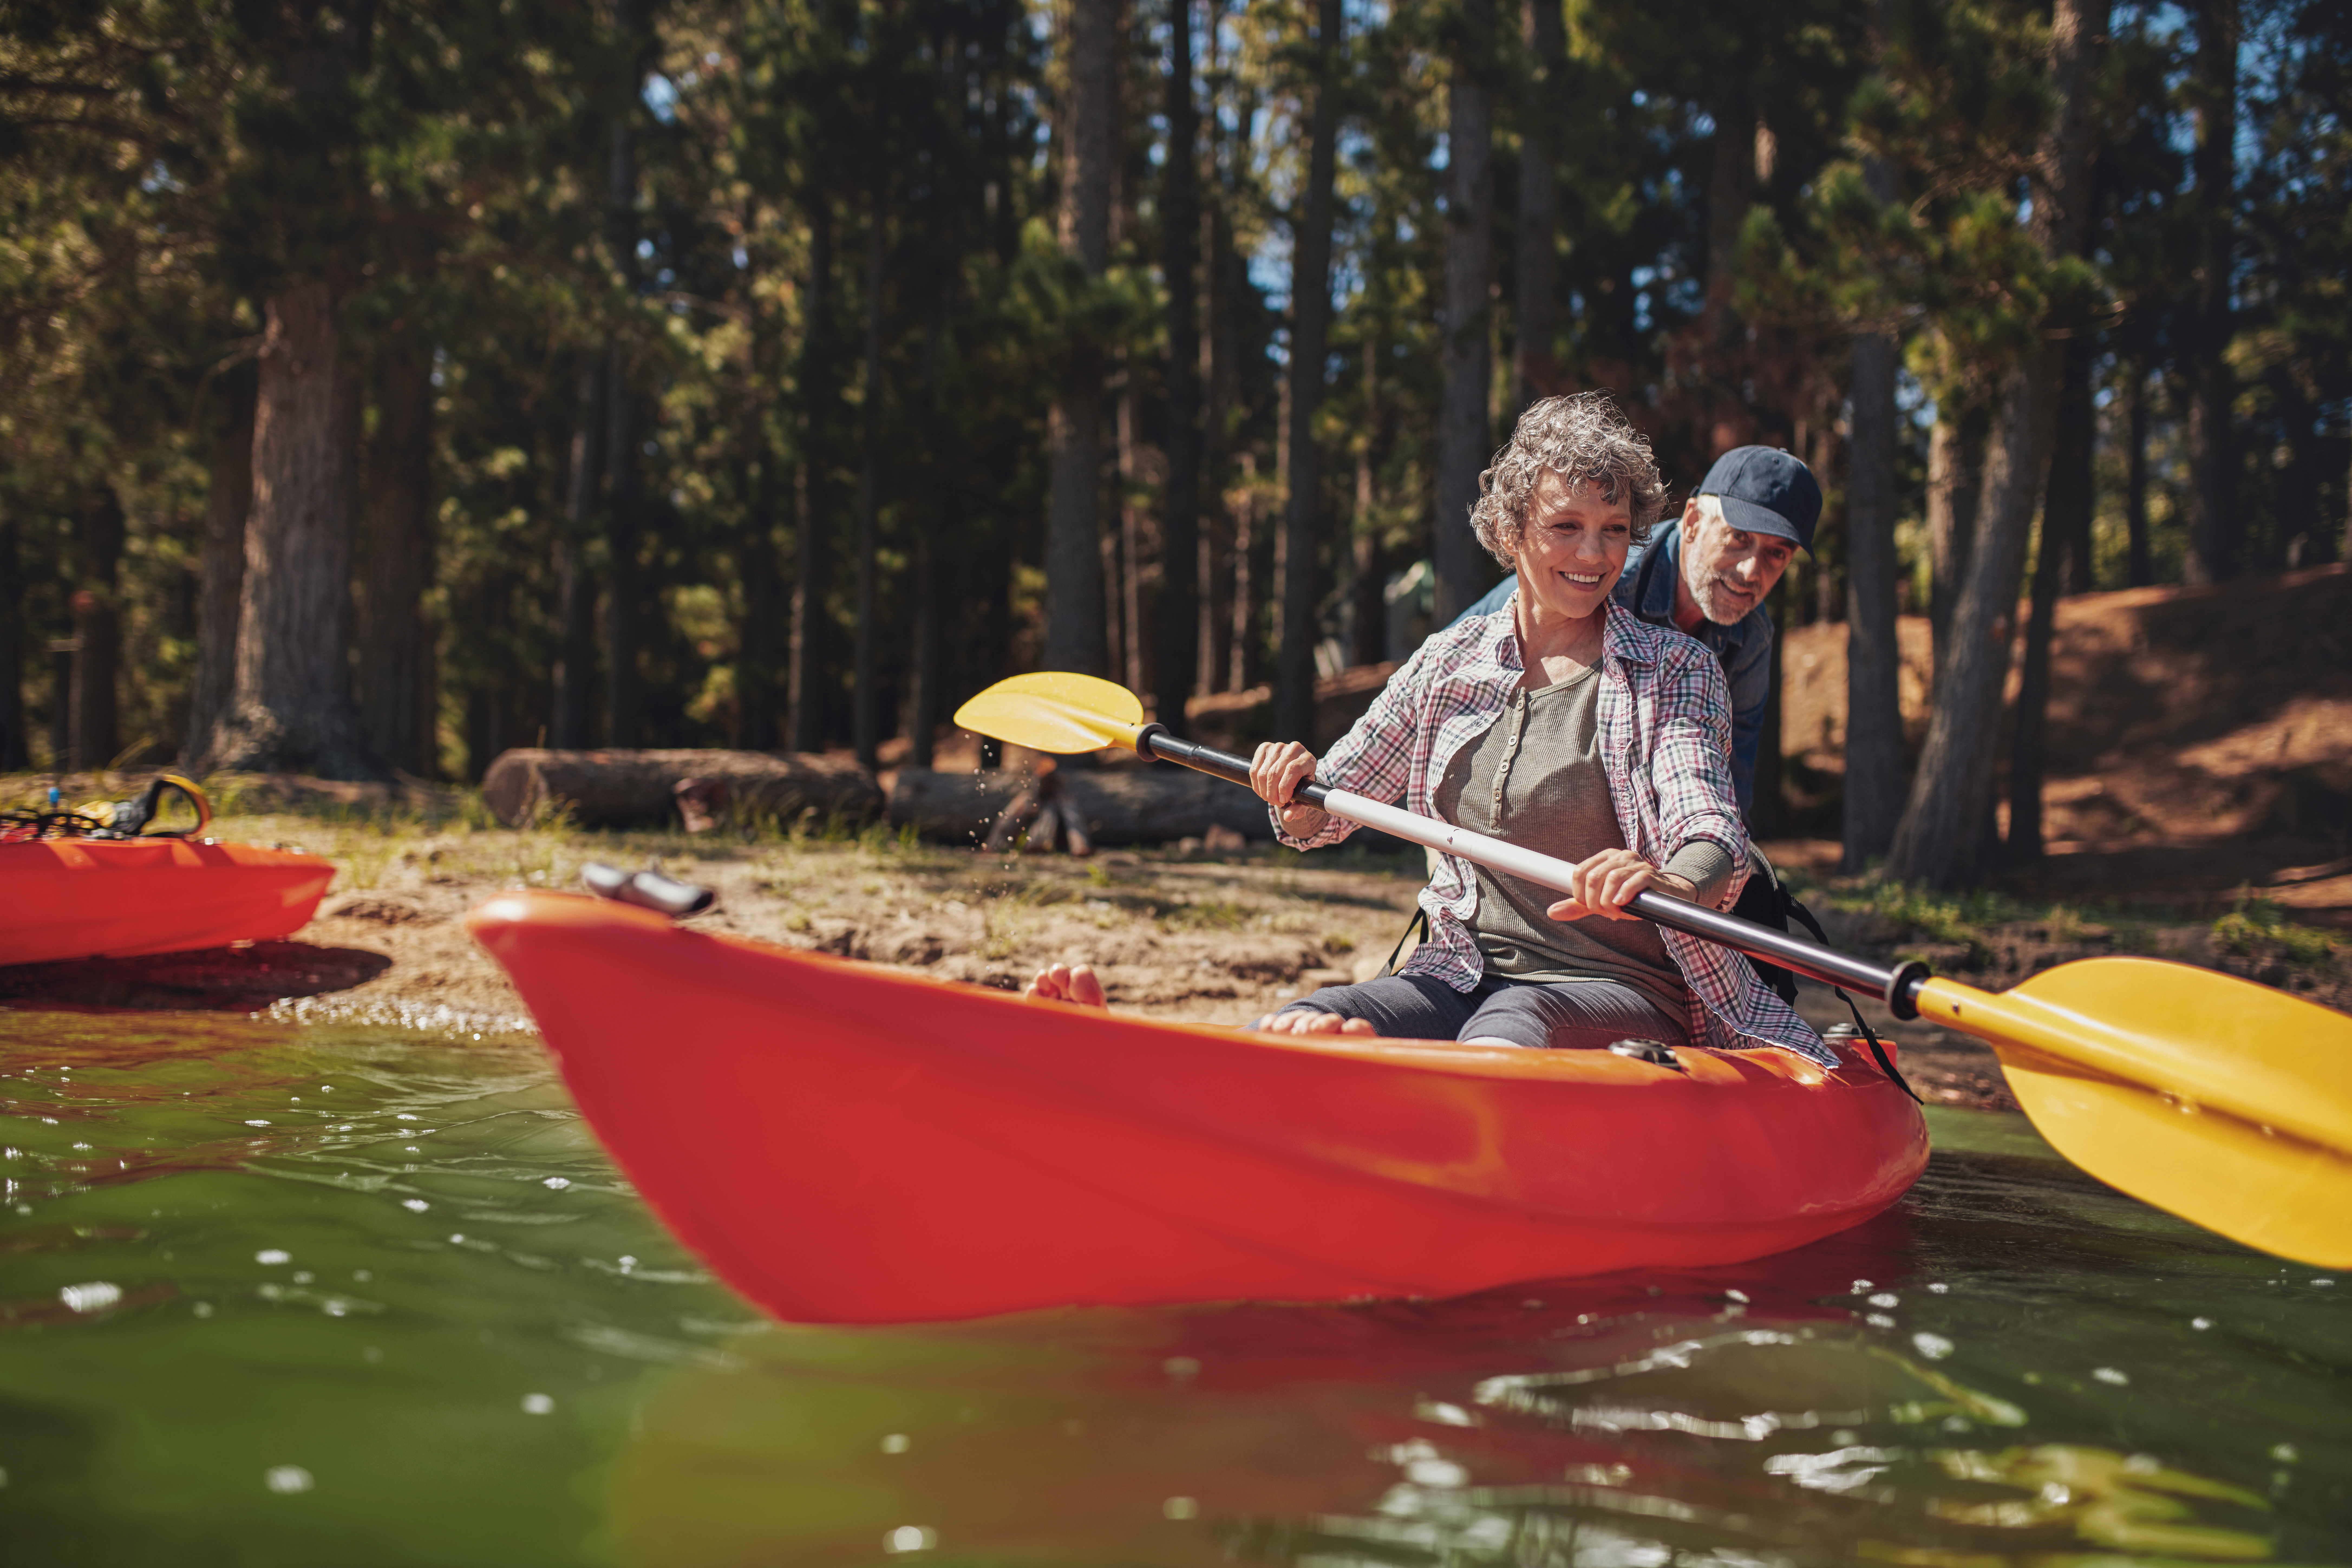 Mature woman learning to row in kayak